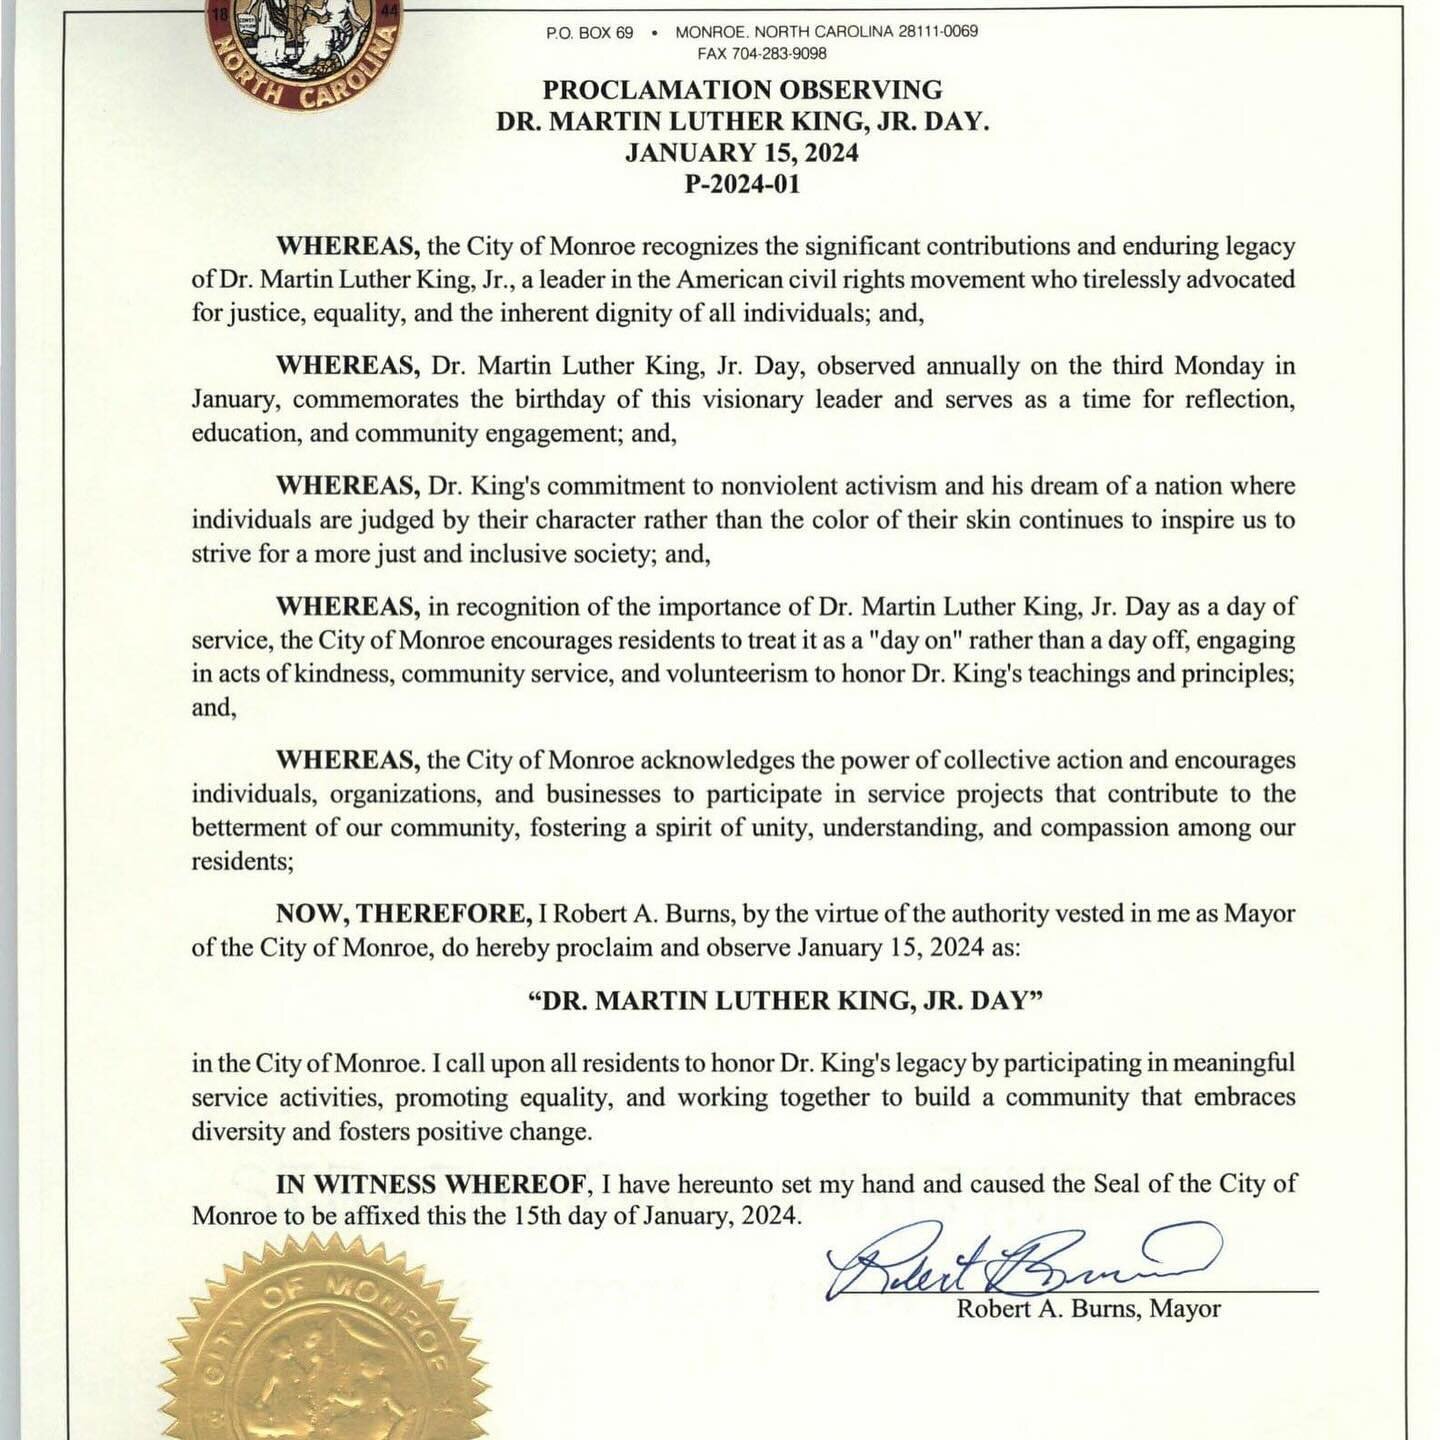 *SPECIAL PROCLAMATION* #monroenc #monroestrong #ilovemycity #DrMartinLutherKing #proclamation